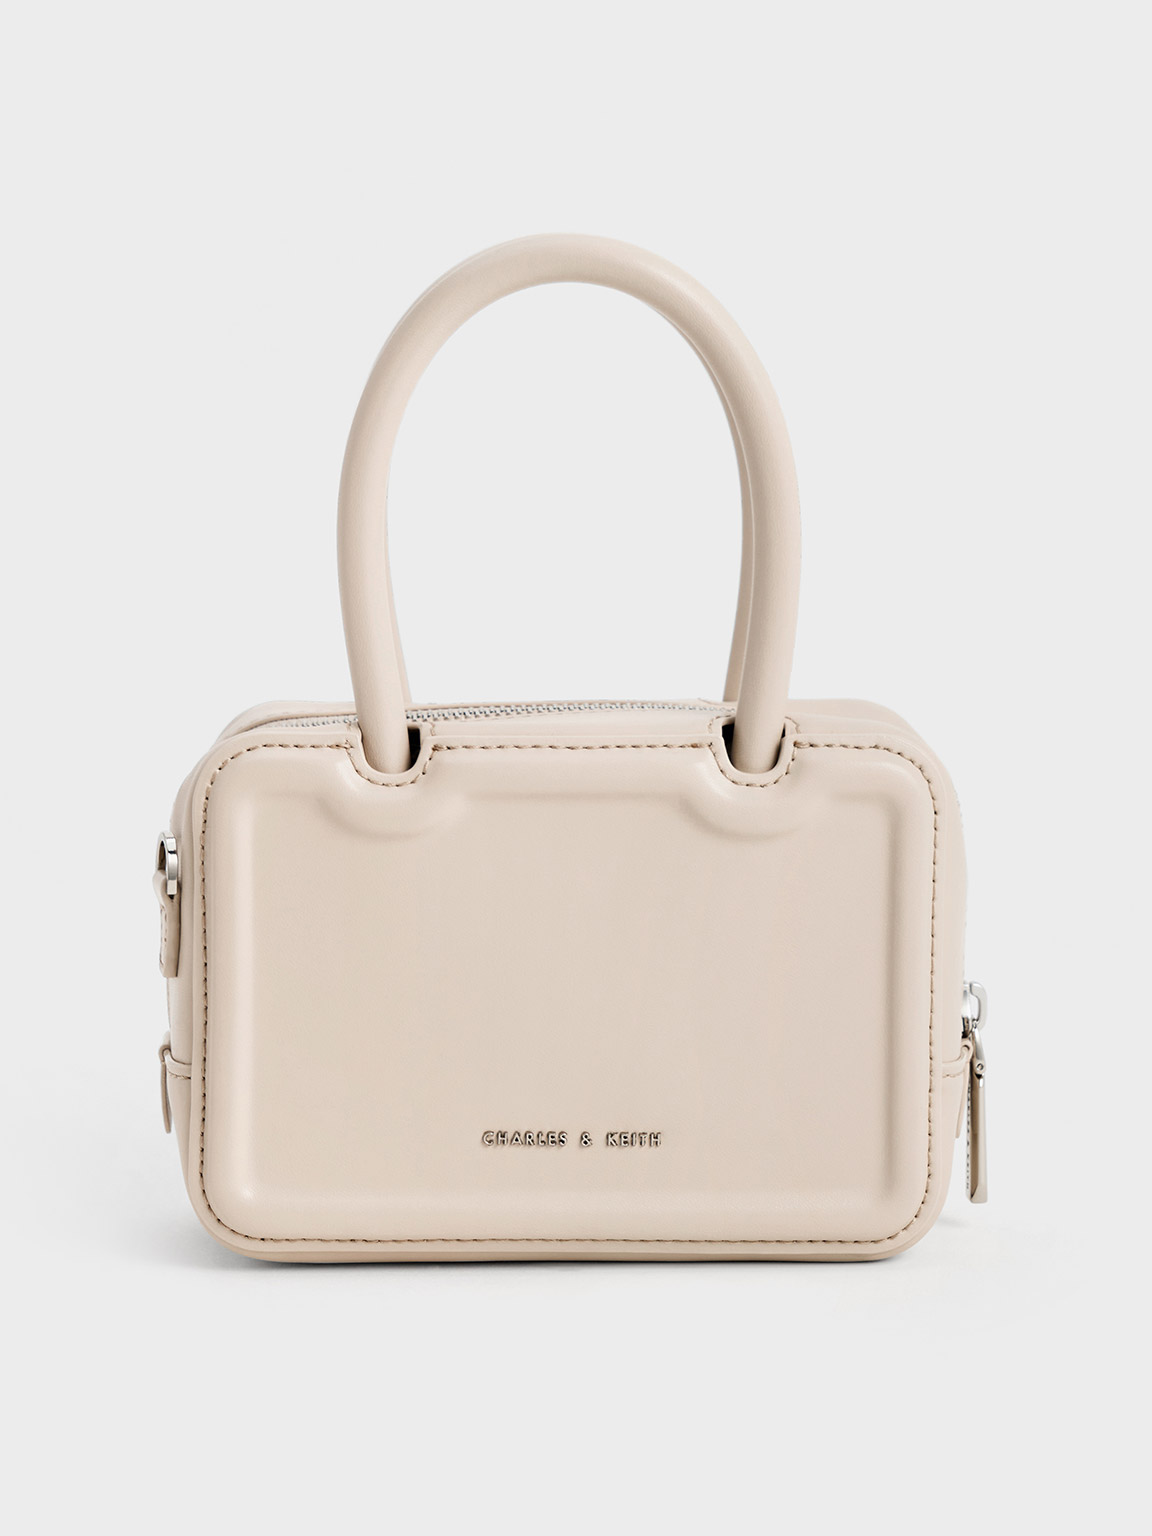 Charles & Keith Perline Elongated Tote Bag In Oat